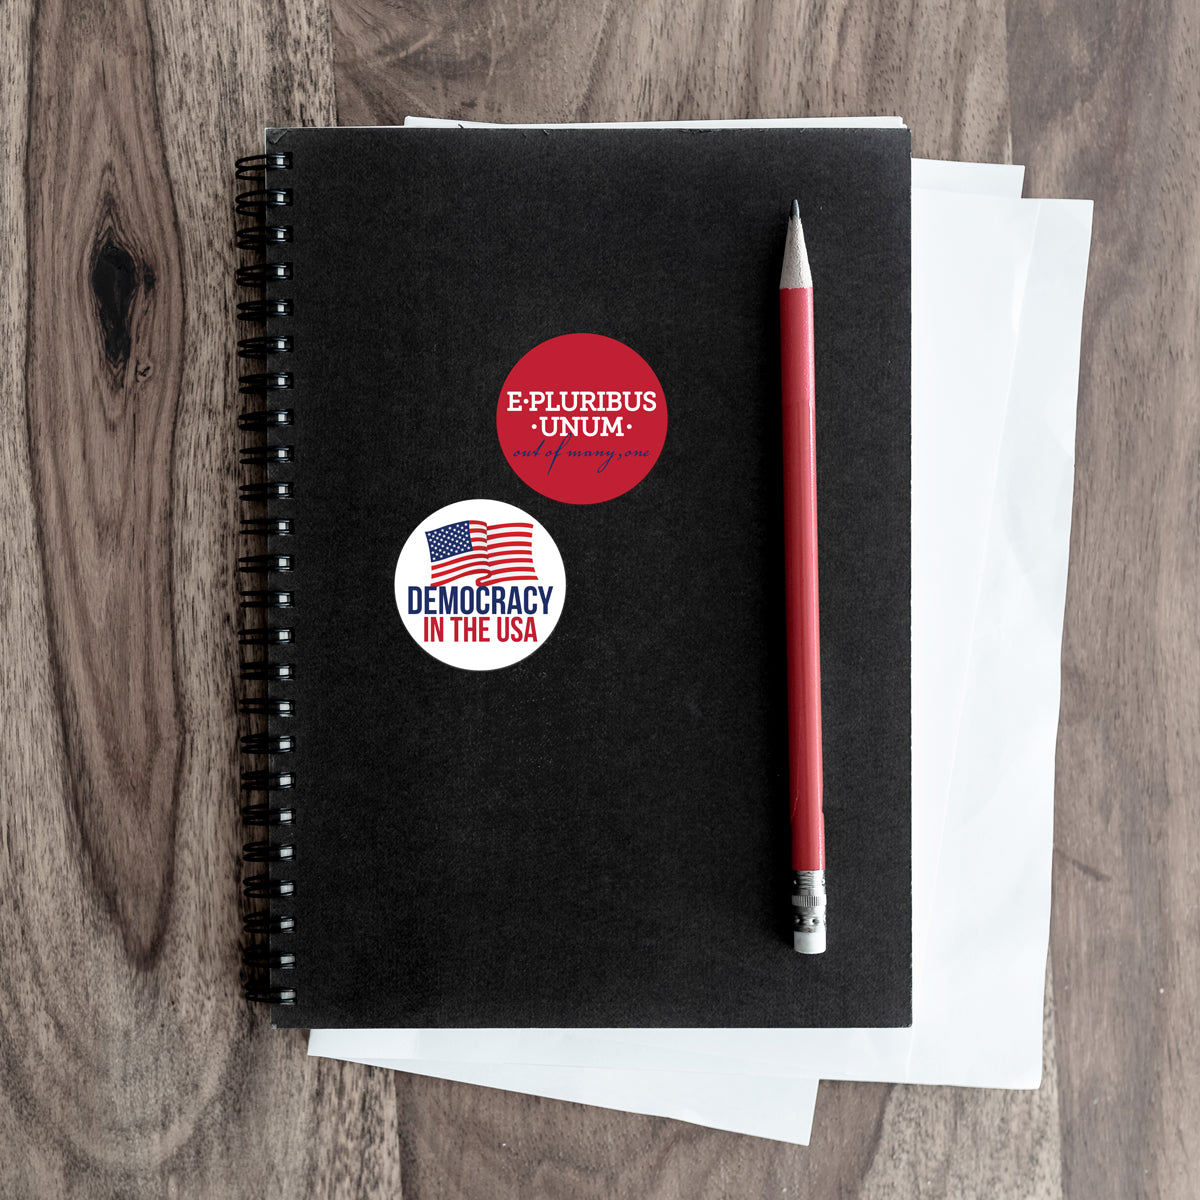 e pluribus and democracy stickers on a notebook